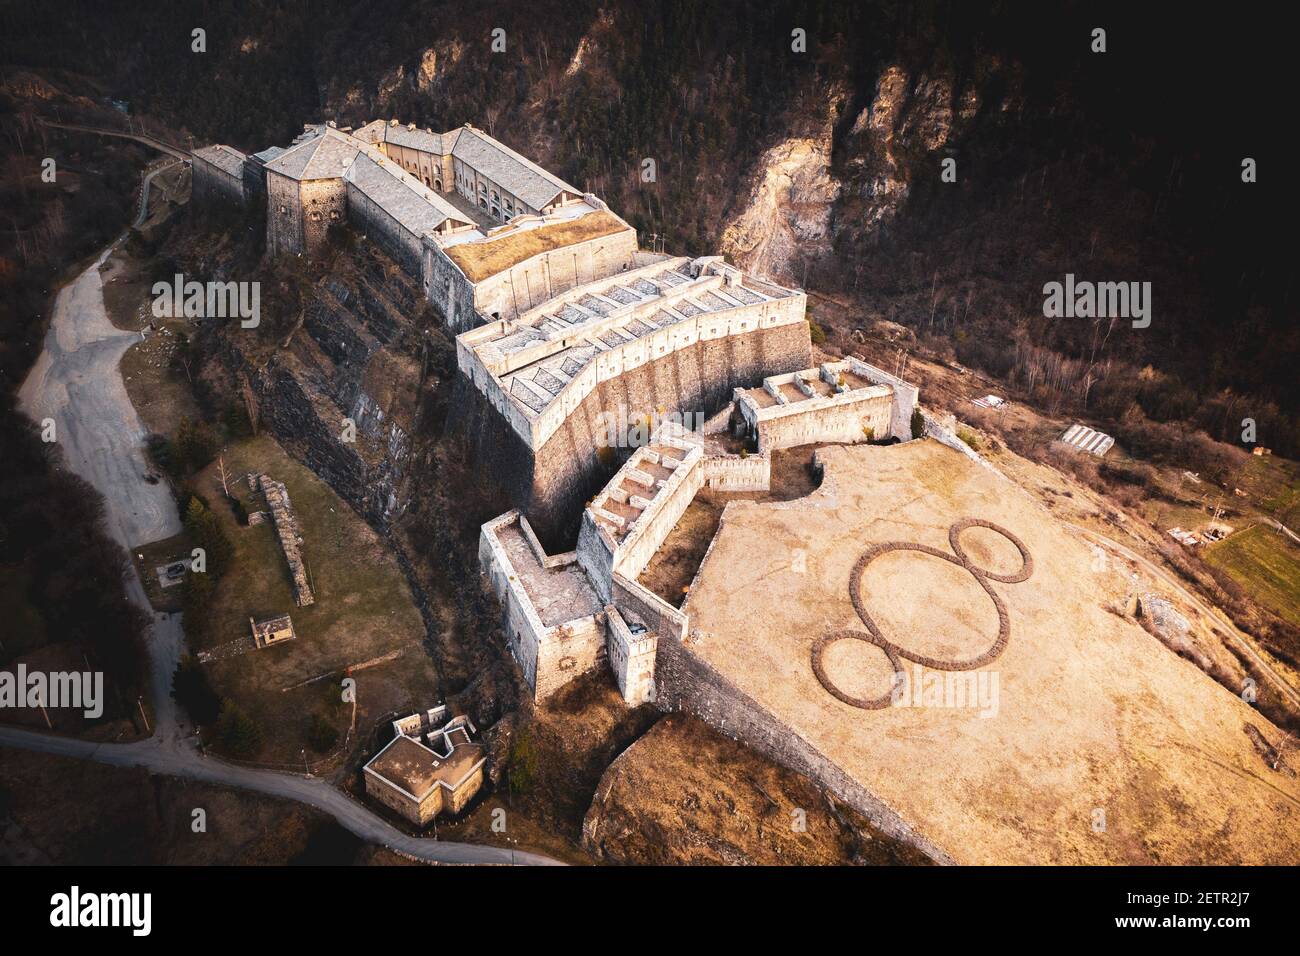 ITALY, EXILLES: Aerial view of the Exilles Fort, a fortified complex reconstructed at the beginning of the 1800s, that was part of the defensive line between Italy and France. It is located in the Susa Valley, along the main road connecting Turin to France. Stock Photo